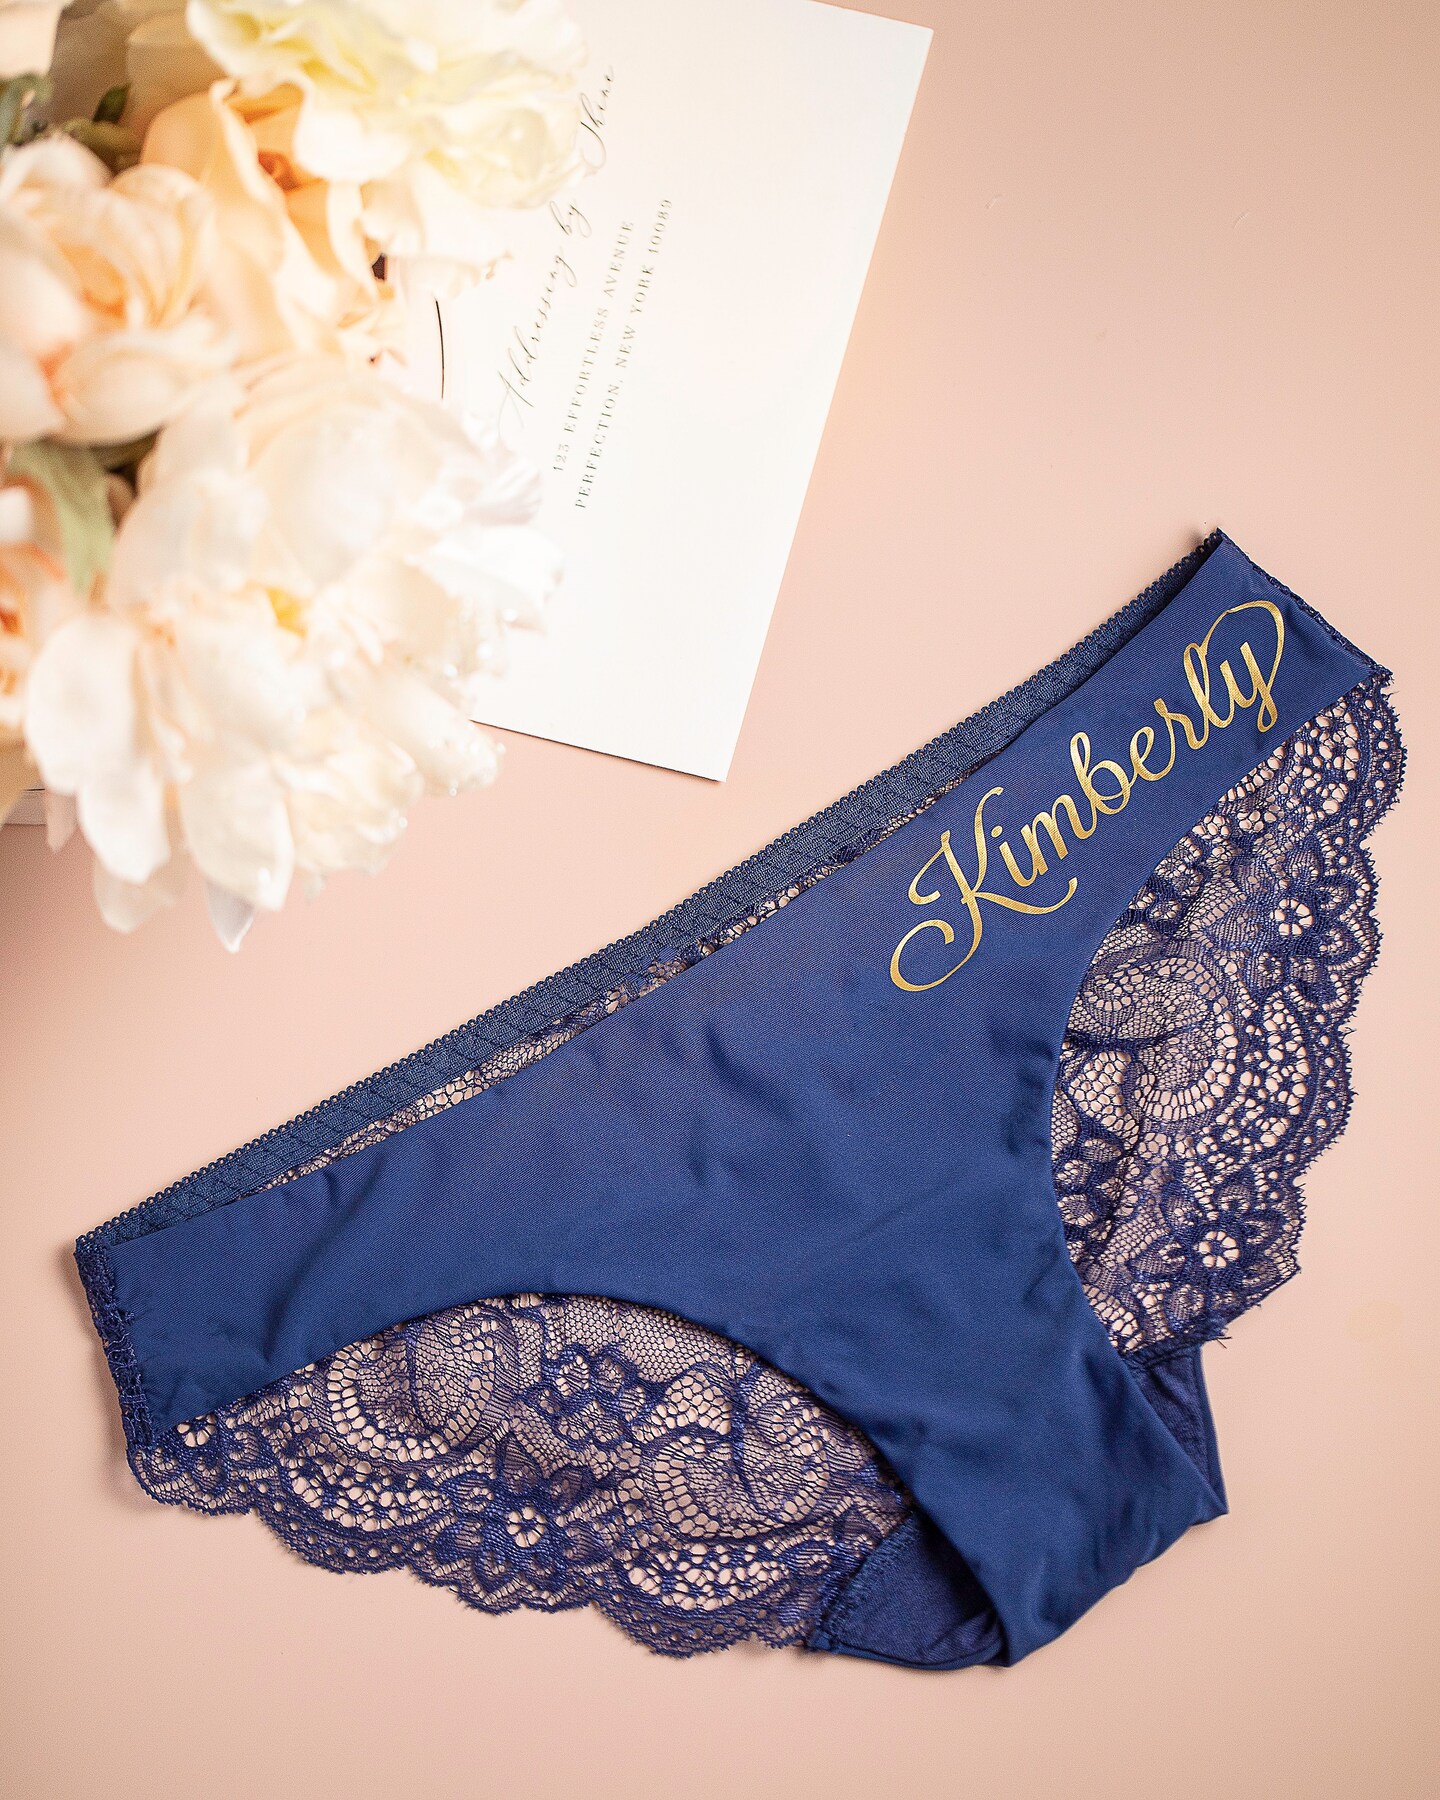 Valentine's Day Personalized Bridal Lace Thong Bride panty Wedding